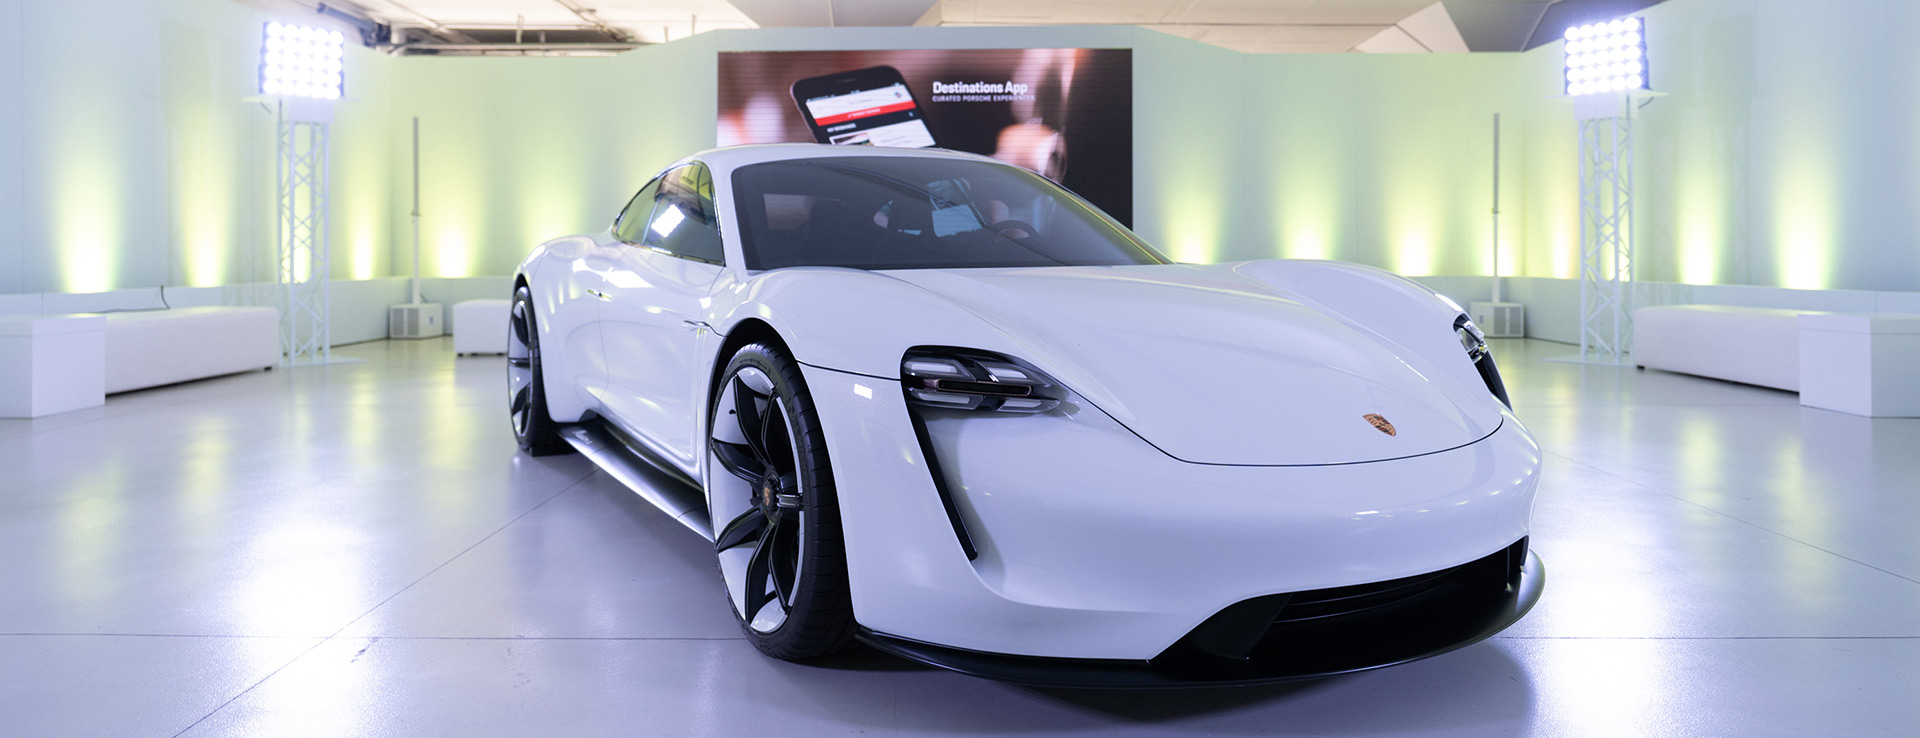 Porsche - Exclusive viewing of the Mission E concept car in South Africa.